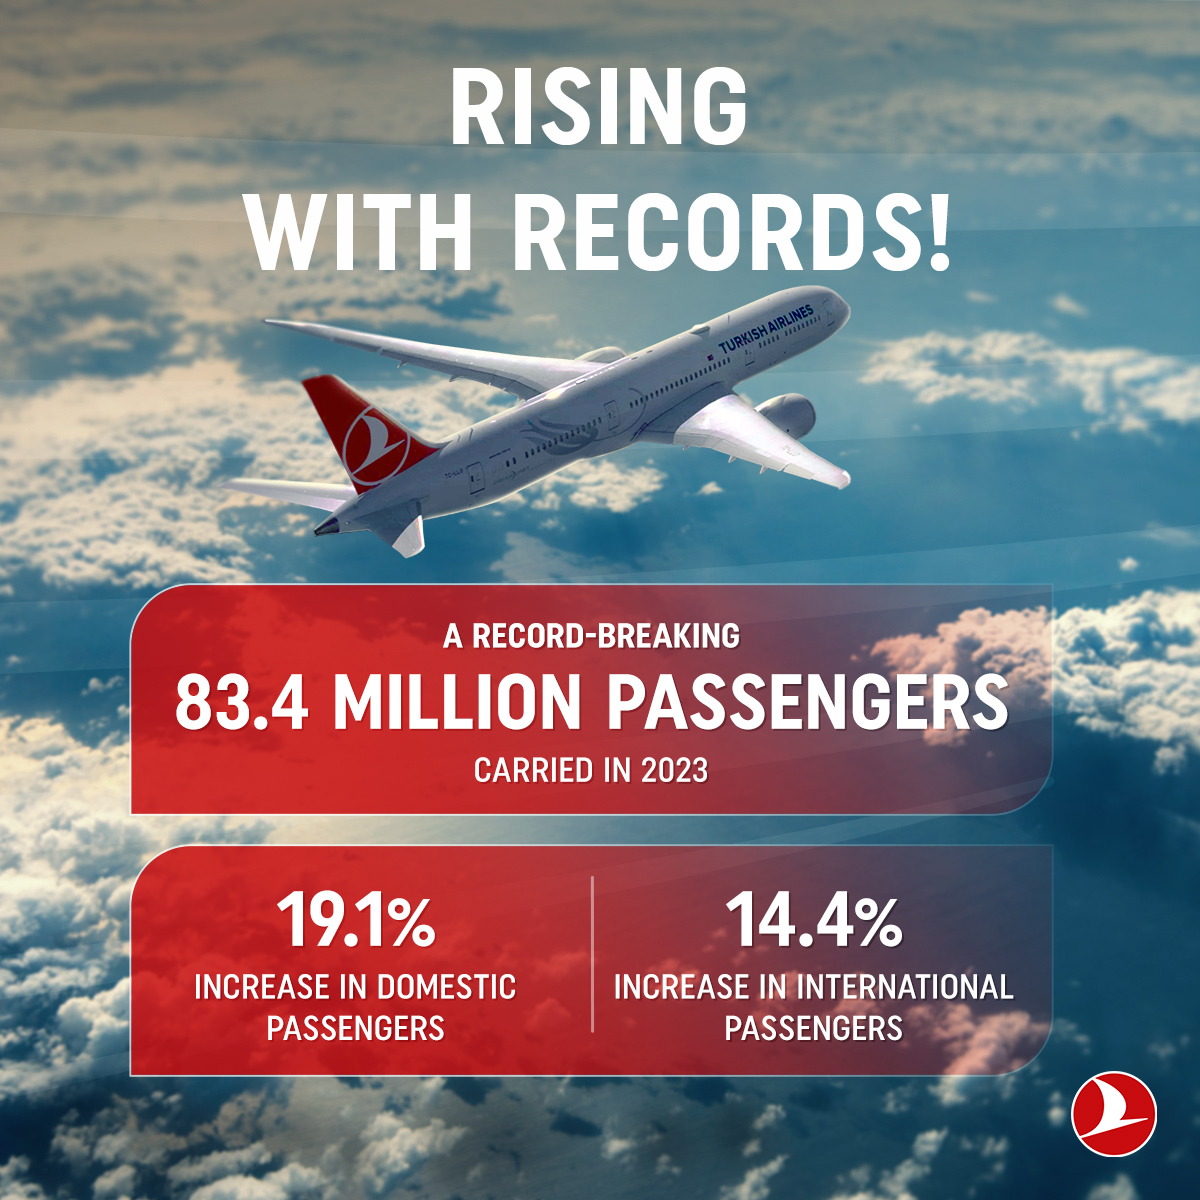 ✈️ Proudly soaring towards new success stories! We increased our passenger count by 16.1% in 2023, reaching 83.4 million. Experiencing a 19.1% increase in domestic passengers and a 14.4% increase in international passengers, we are delighted to connect you to new discoveries…